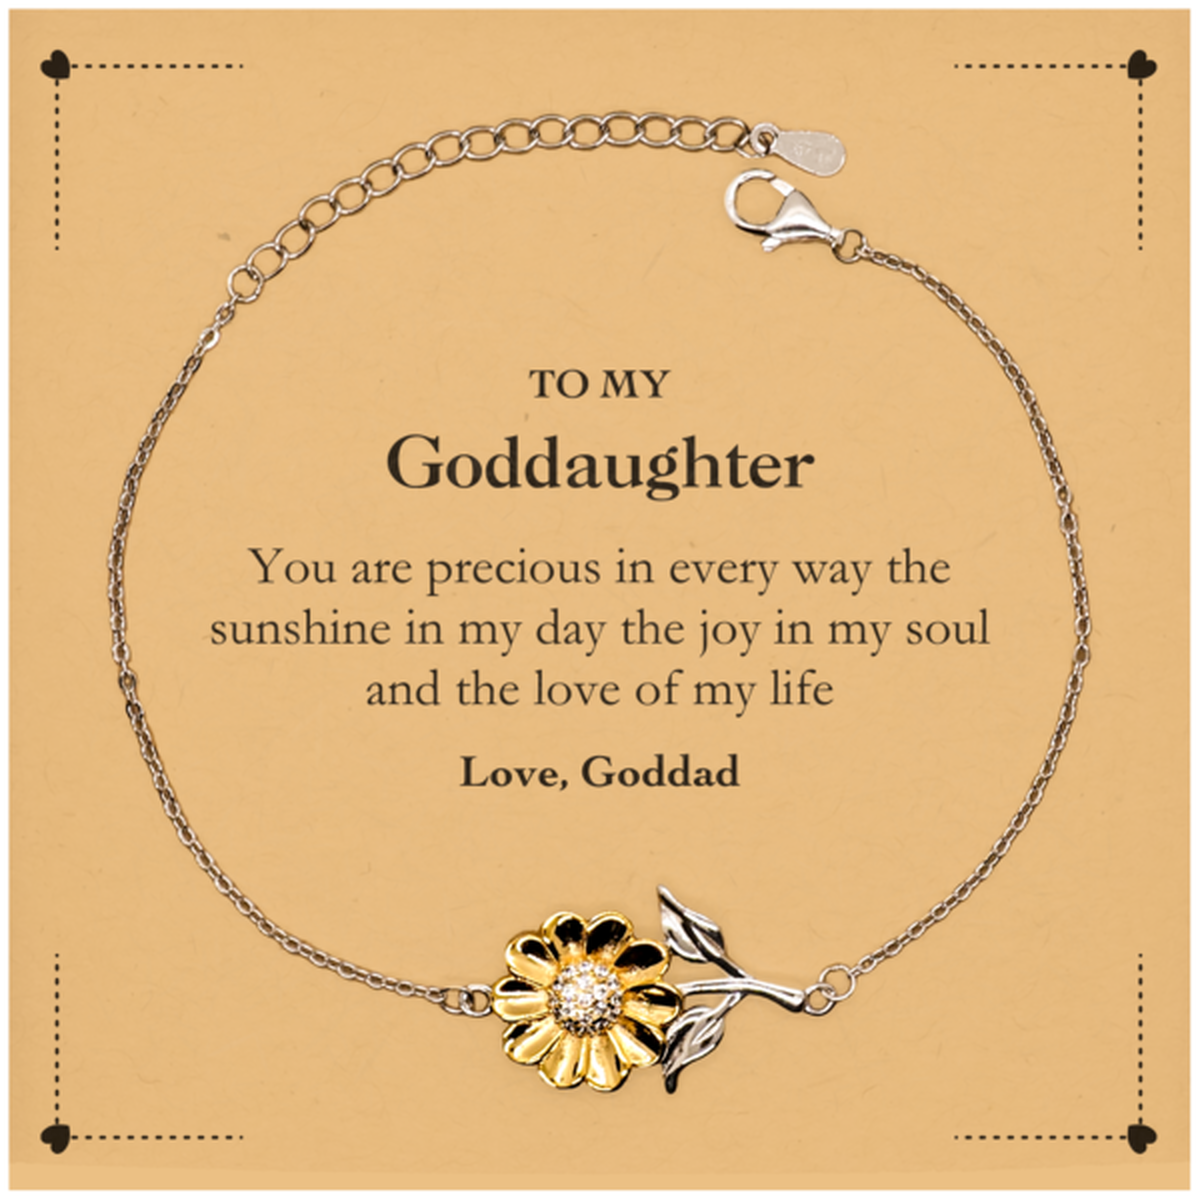 Graduation Gifts for Goddaughter Sunflower Bracelet Present from Goddad, Christmas Goddaughter Birthday Gifts Goddaughter You are precious in every way the sunshine in my day. Love, Goddad